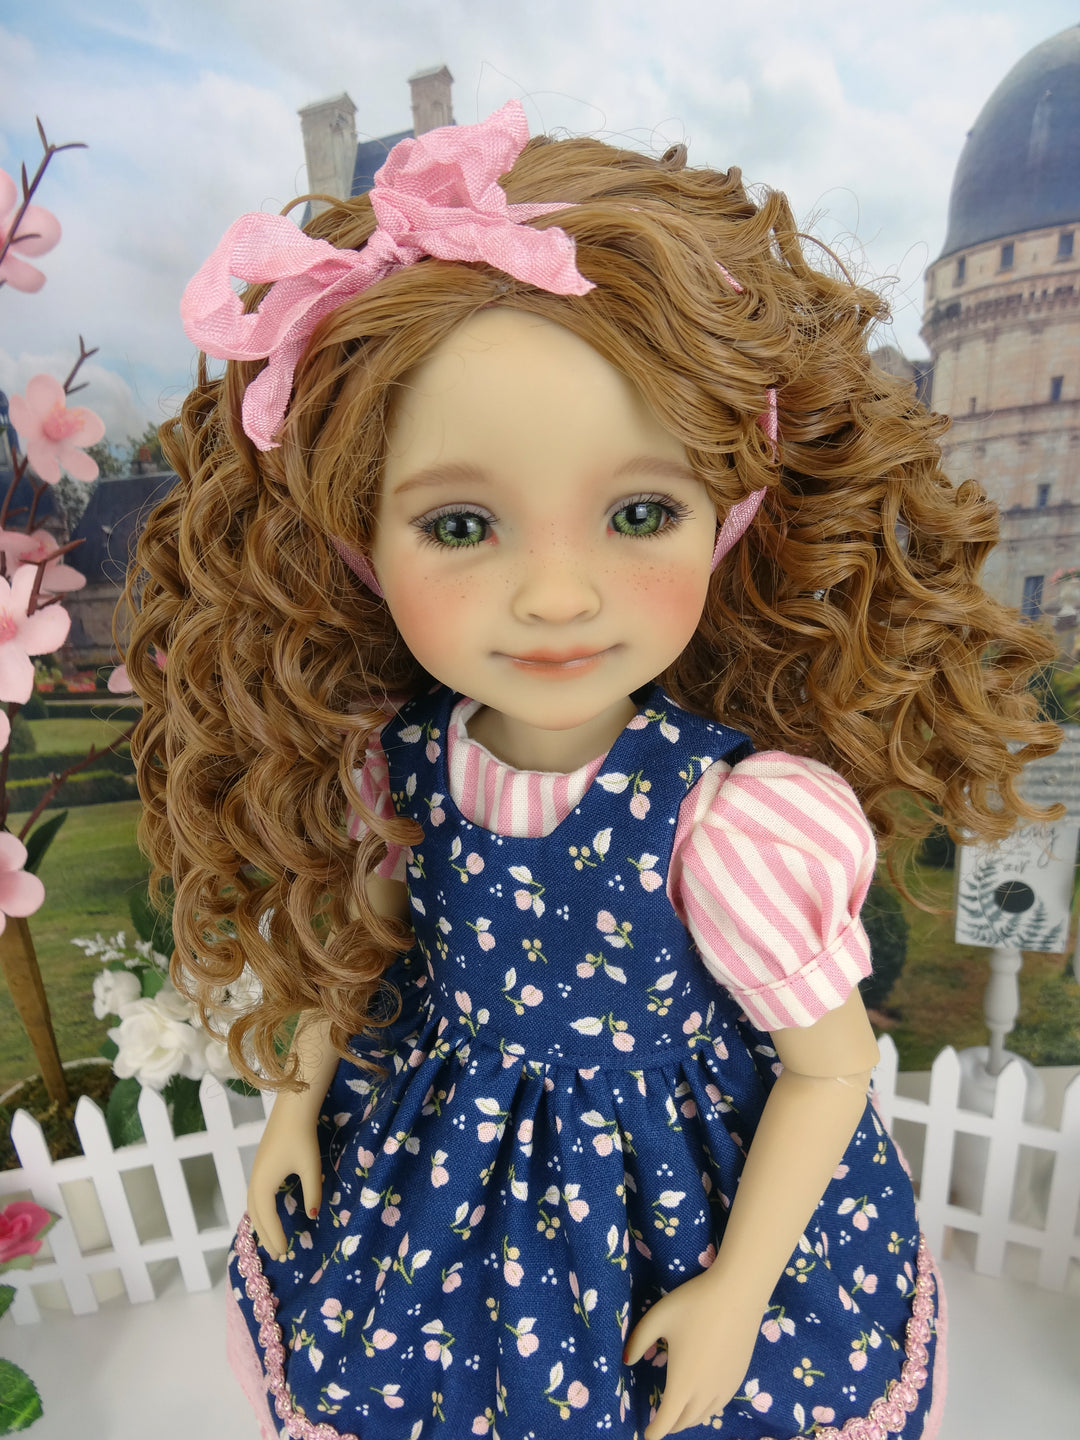 Dogwood Buds - dress & pinafore with shoes for Ruby Red Fashion Friends doll